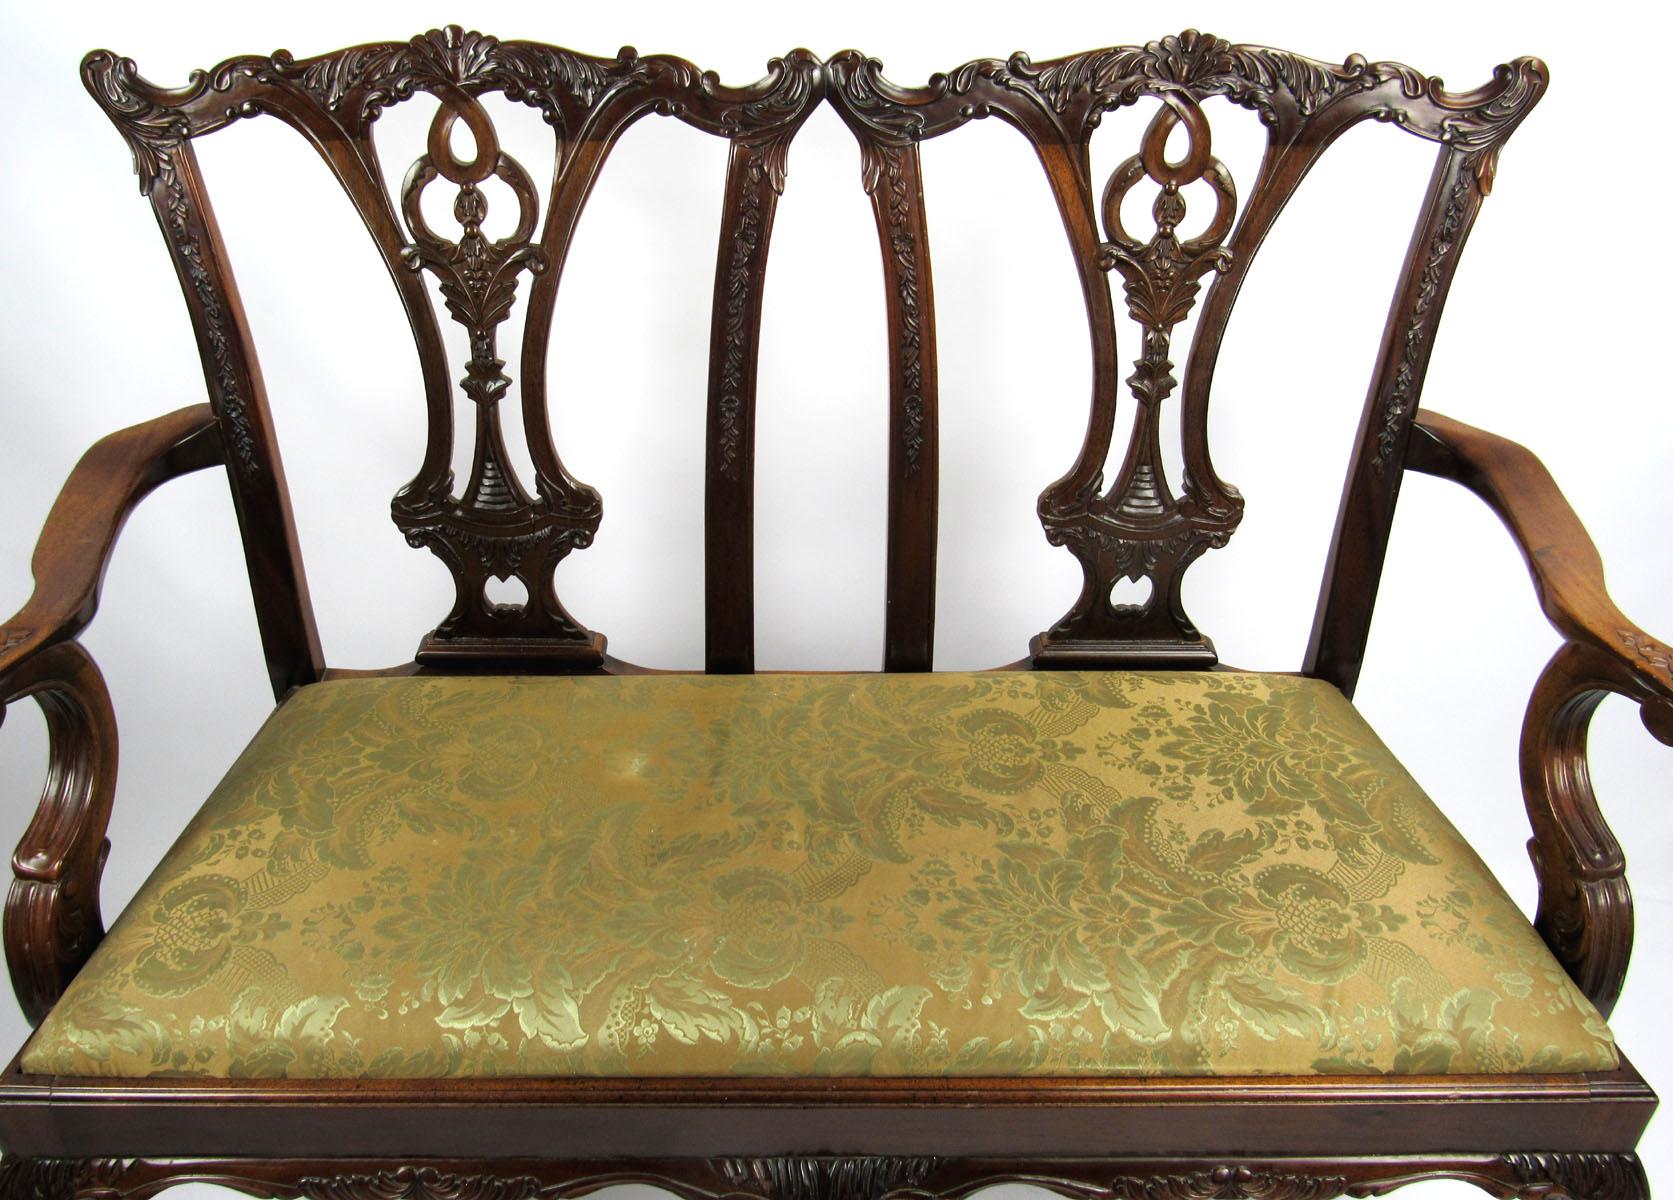 Nicely carved 20th century English mahogany parlor settee with ball and claw feet.